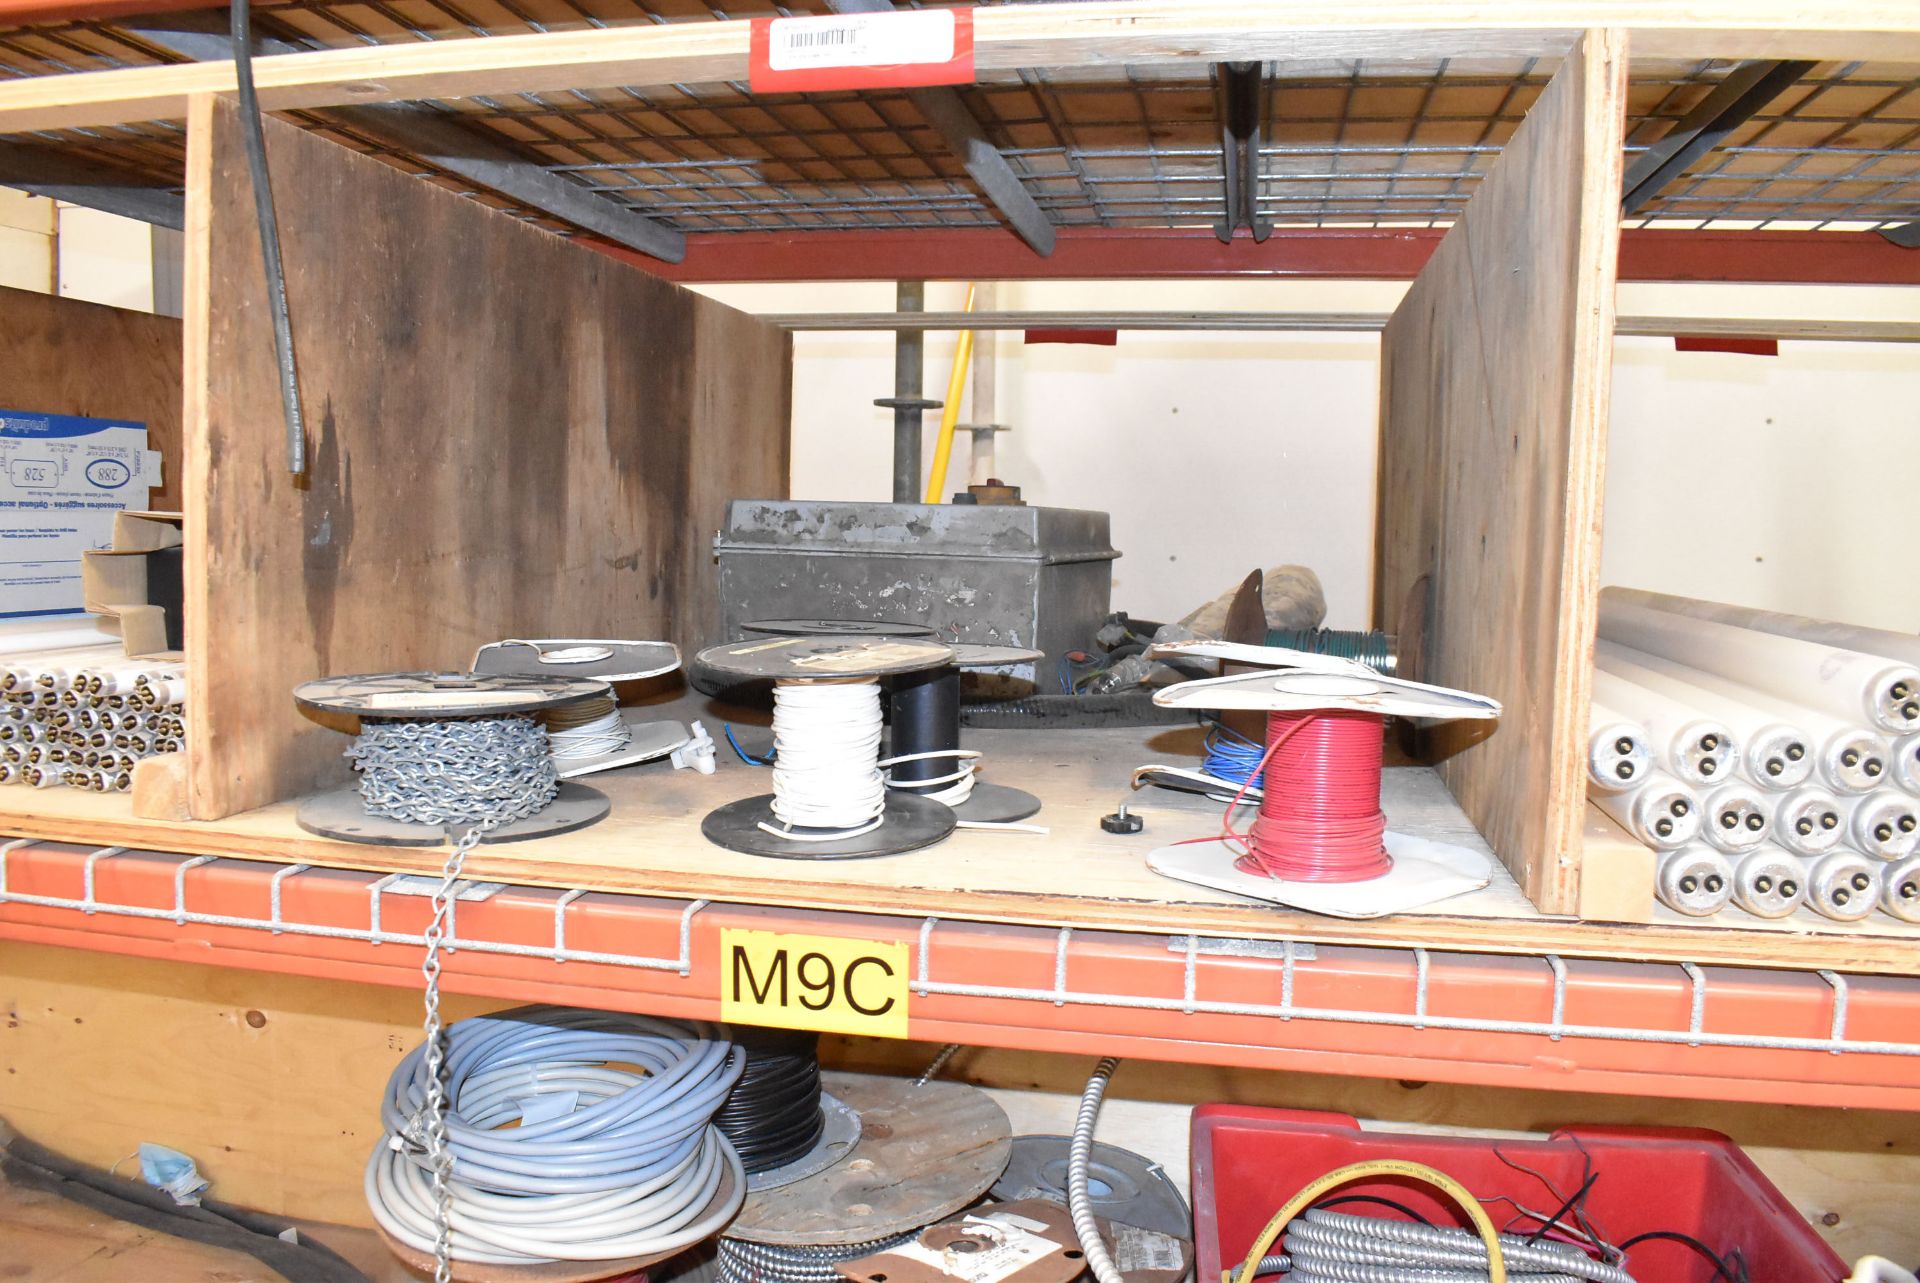 LOT/ ADJUSTABLE HEAVY DUTY RACK WITH CONTENTS CONSISTING OF WIRING, LIGHTING FIXTURES AND FLANGES ( - Image 4 of 7